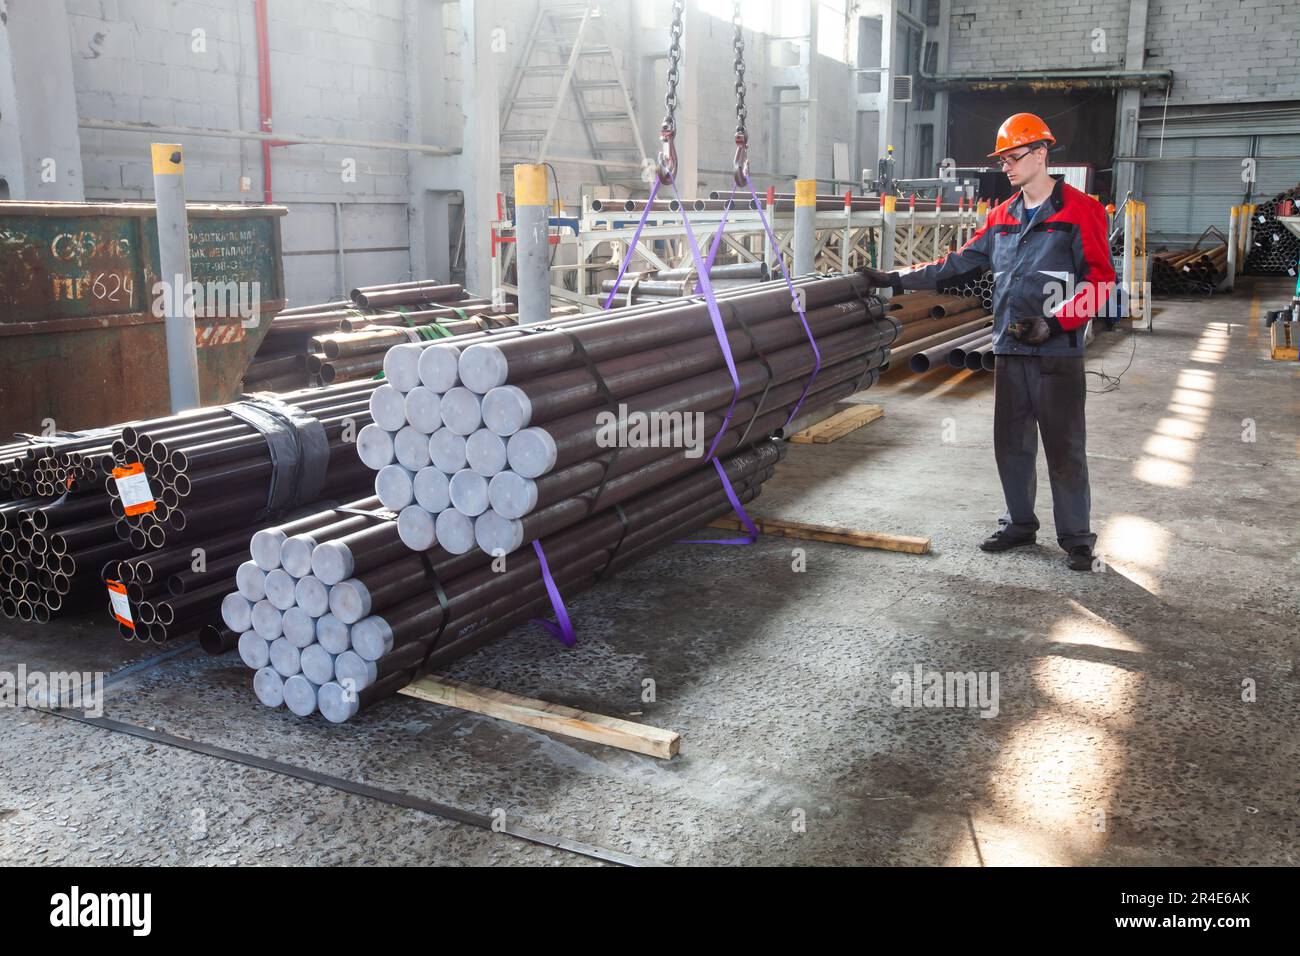 Podolsk, Moscow province - August 02, 2021: Production of oil drill pipes. Young worker lifting ready pipes. Stock Photo